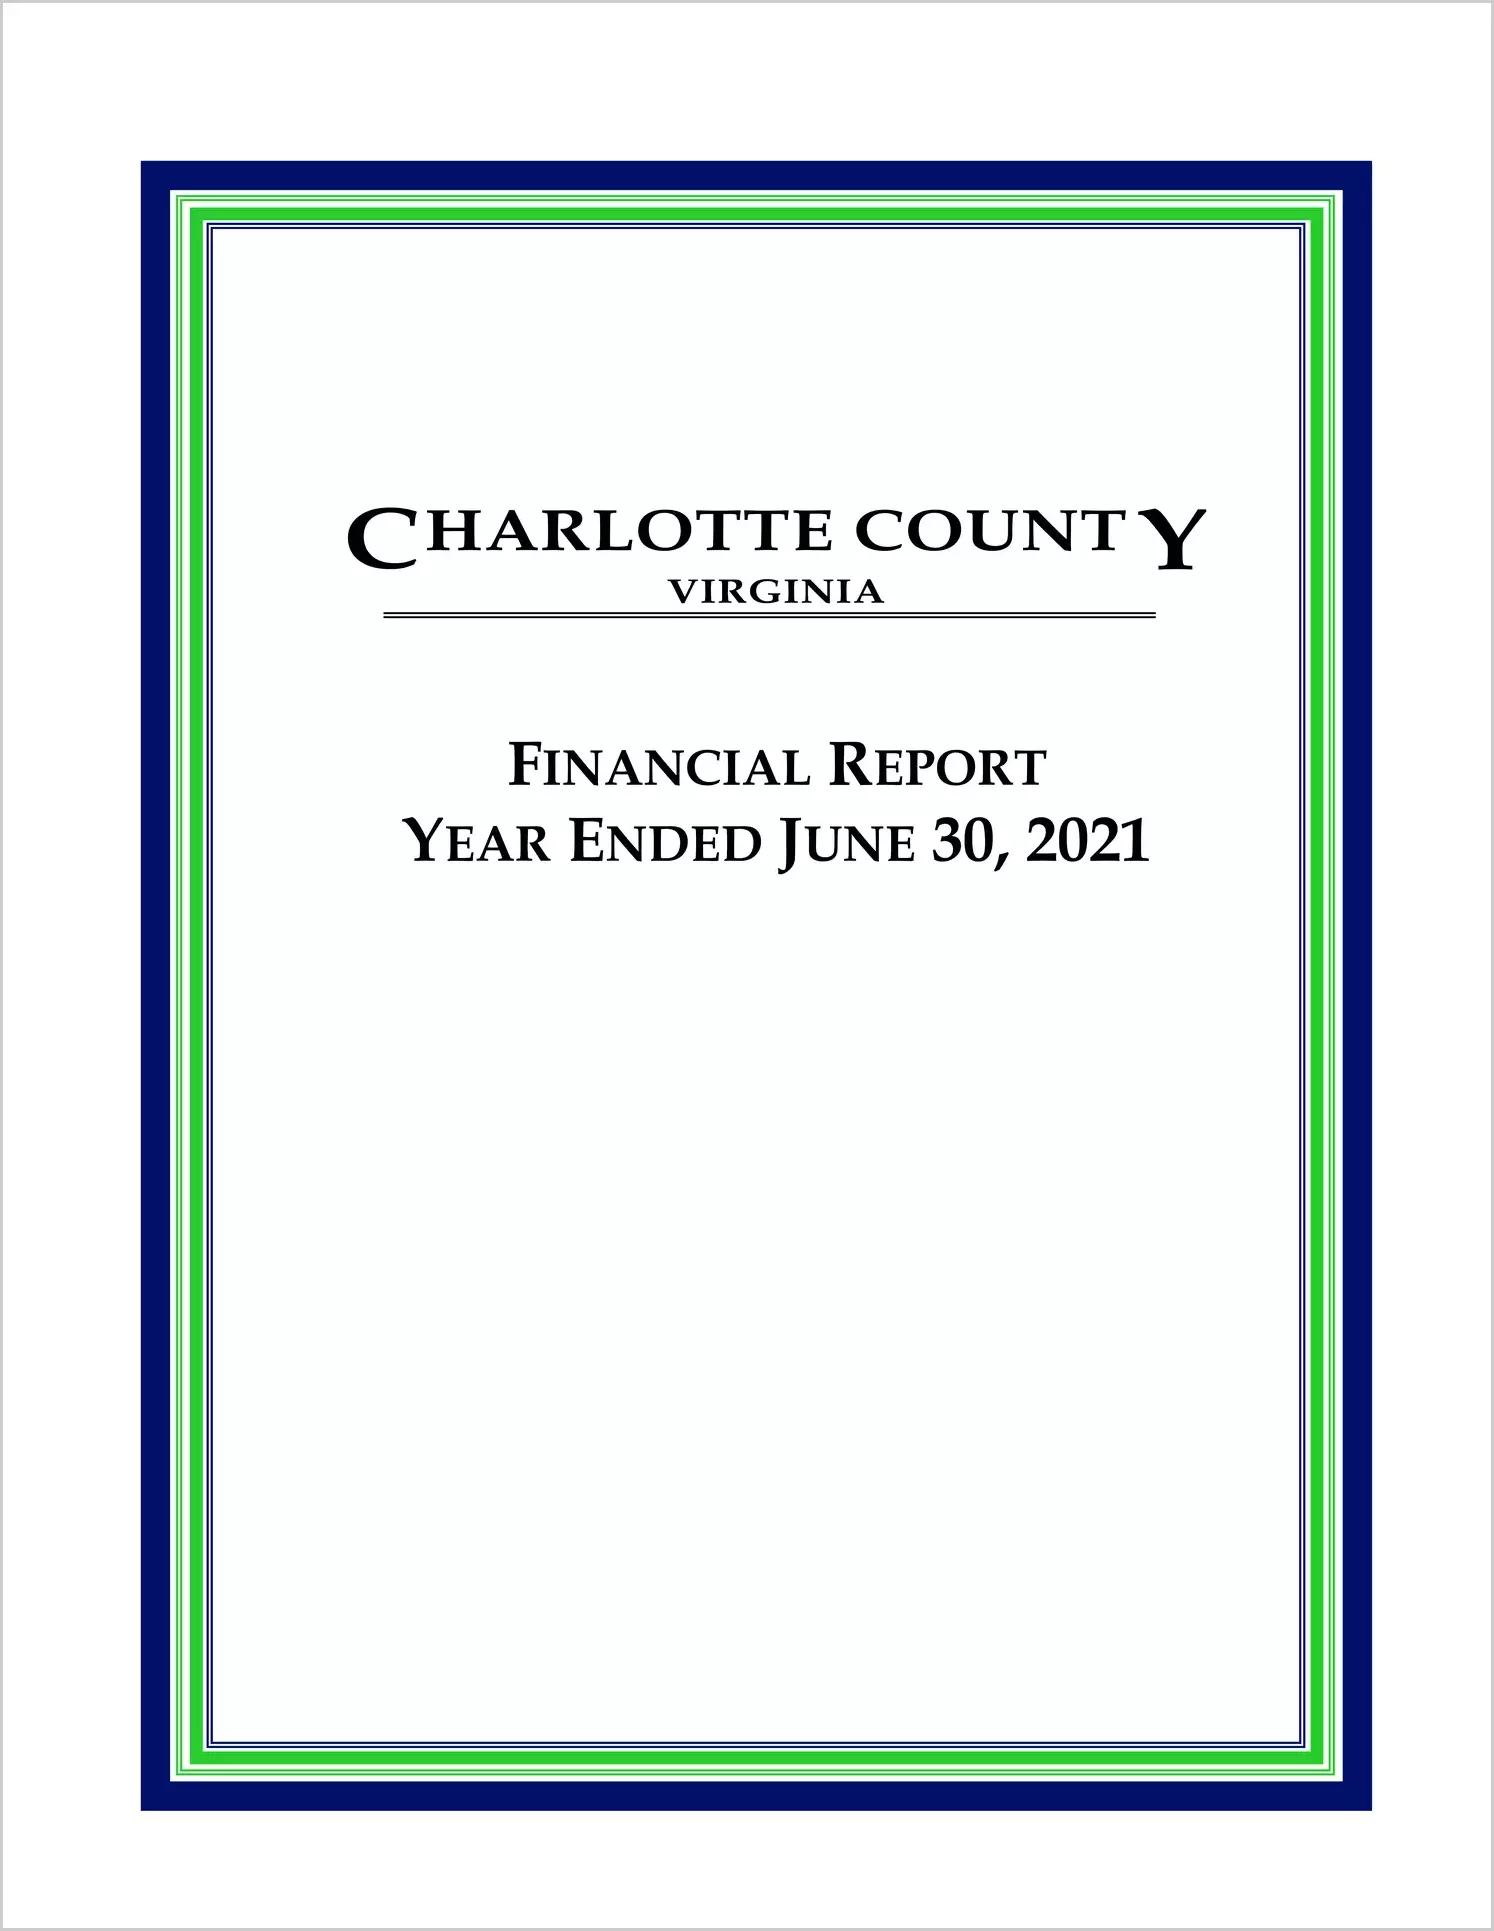 2021 Annual Financial Report for County of Charlotte